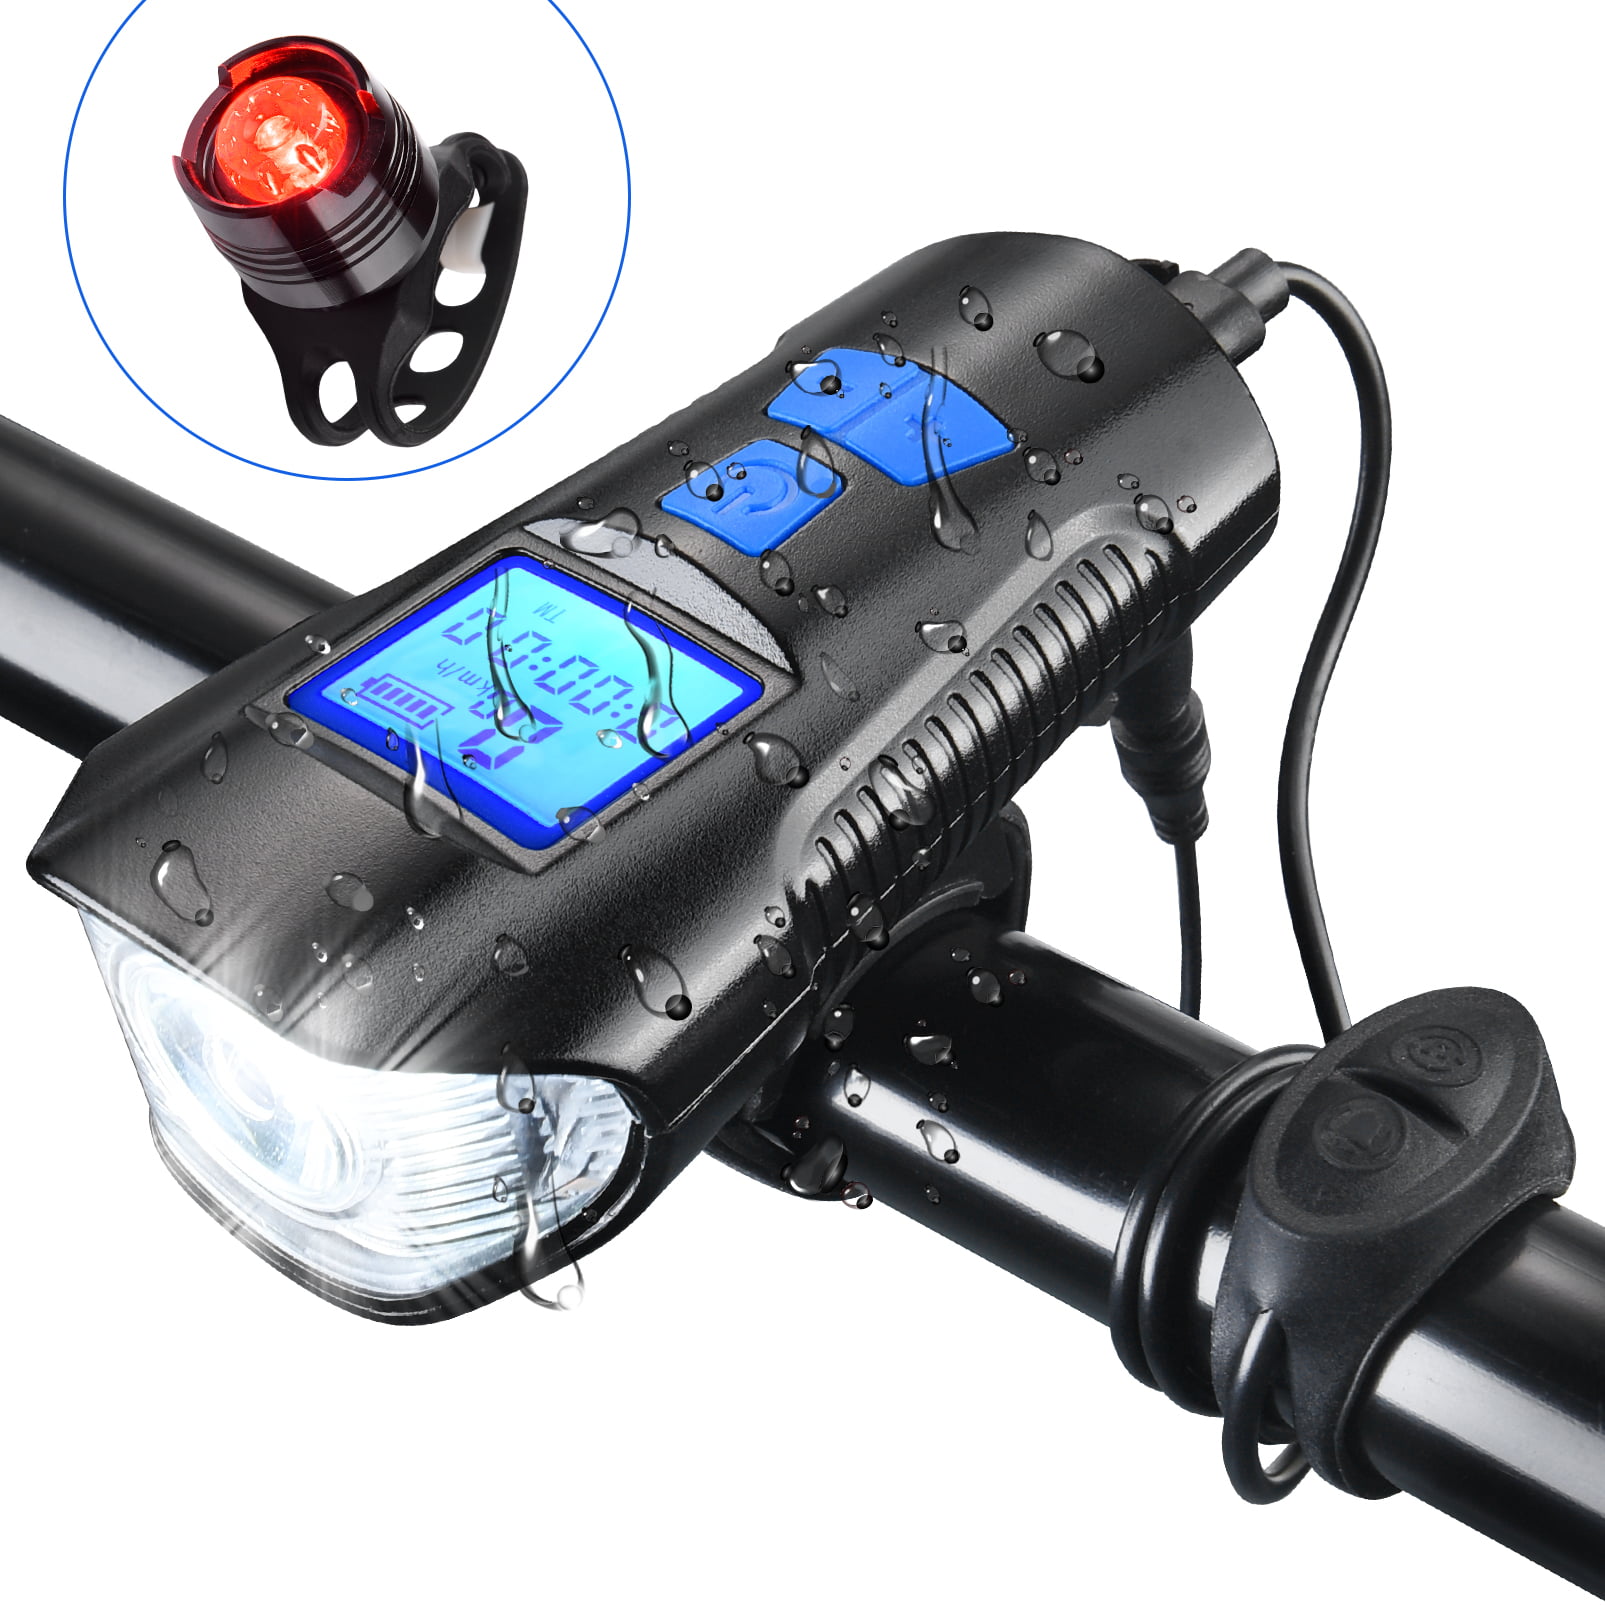 Details about   LED Bicycle Headlight Front Lamp USB Rechargeable Taillight Cycling Equipmen 